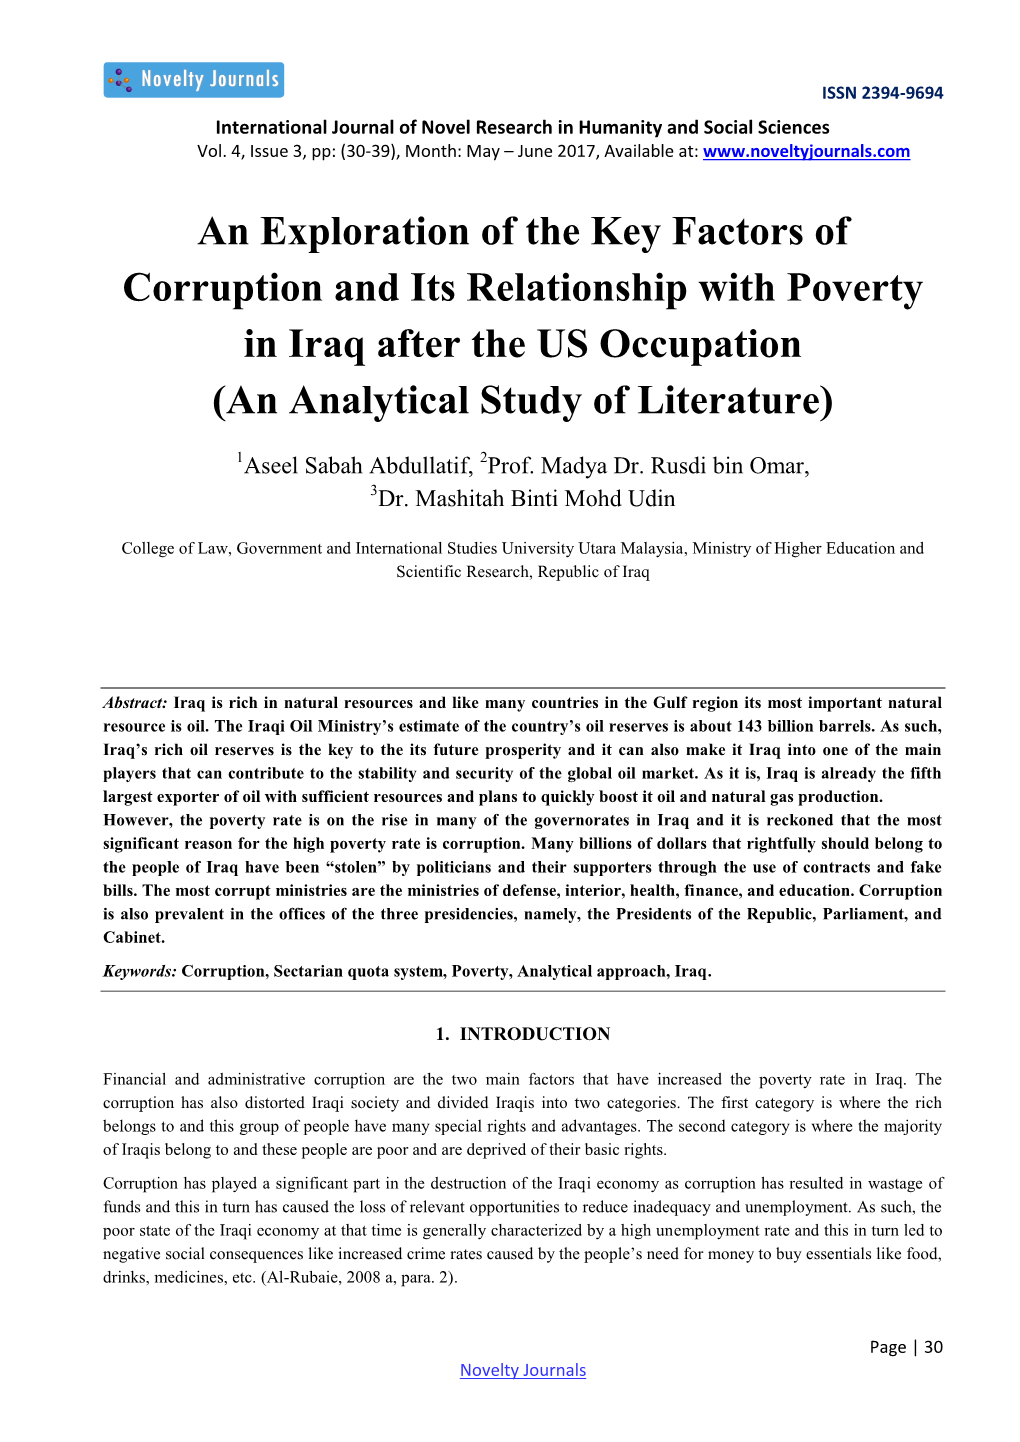 An Exploration of the Key Factors of Corruption and Its Relationship with Poverty in Iraq After the US Occupation (An Analytical Study of Literature)